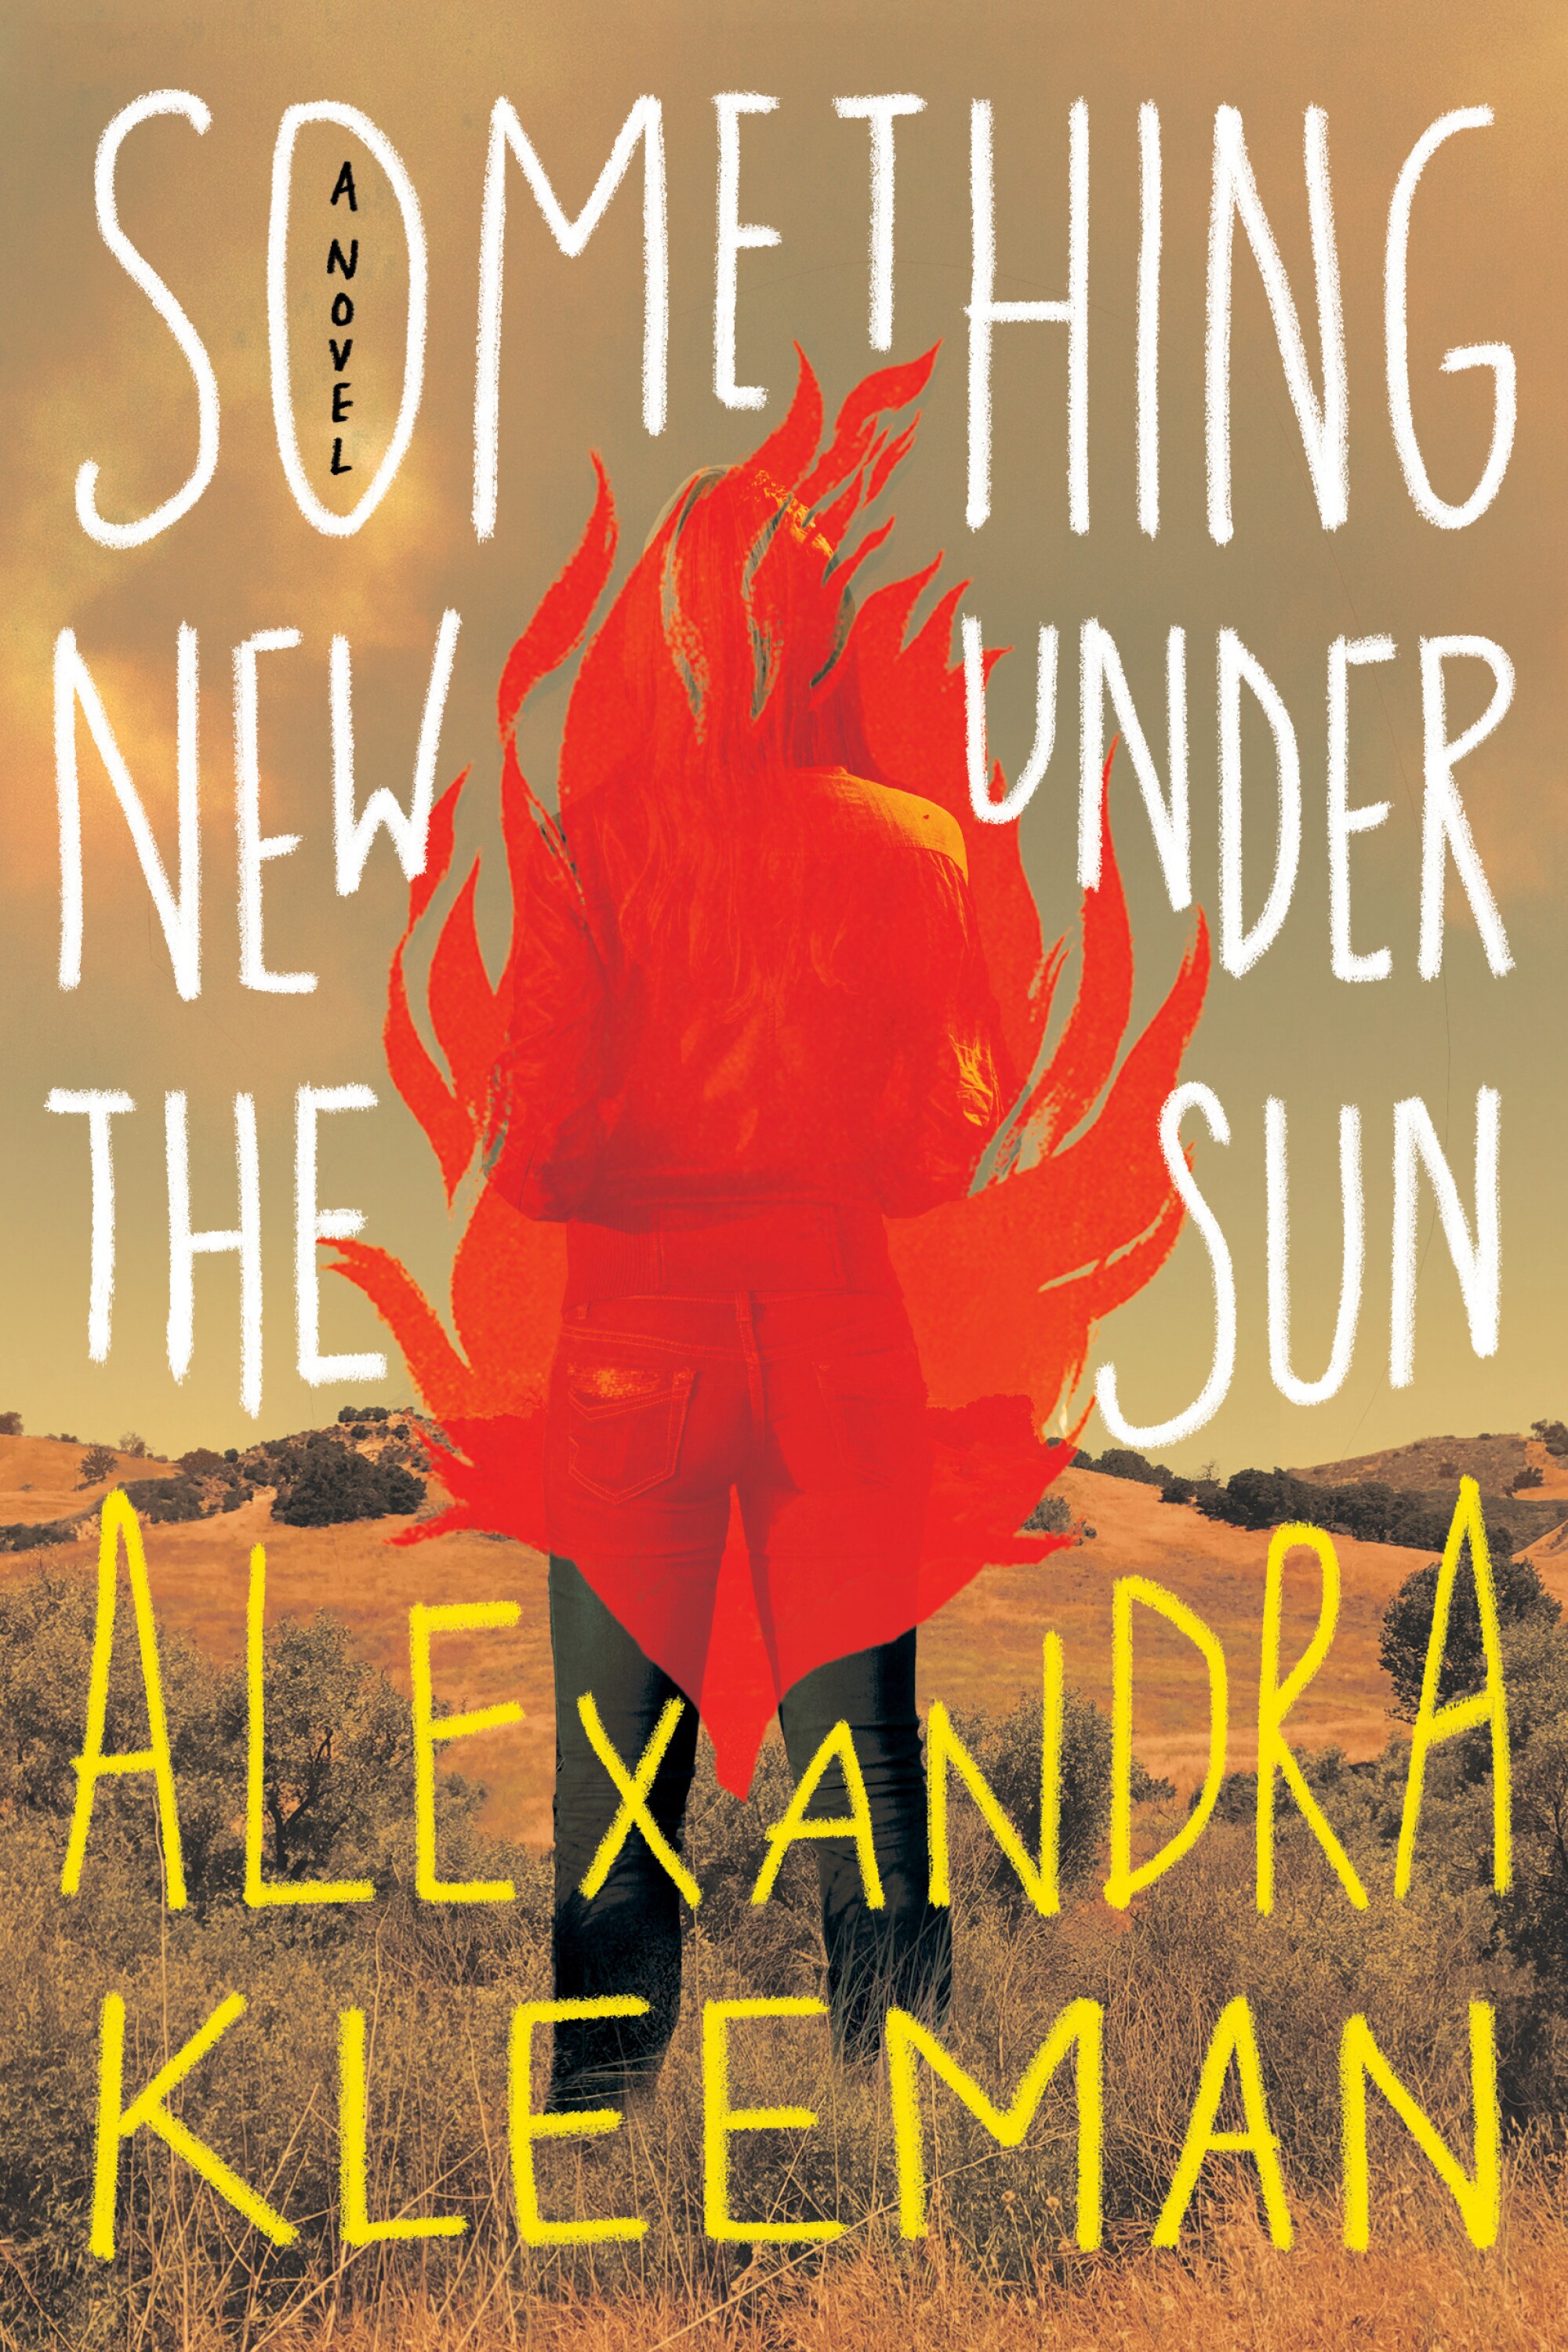 A person on fire in a field in cover of "Something new under the sun," by Alexandra Kleeman.